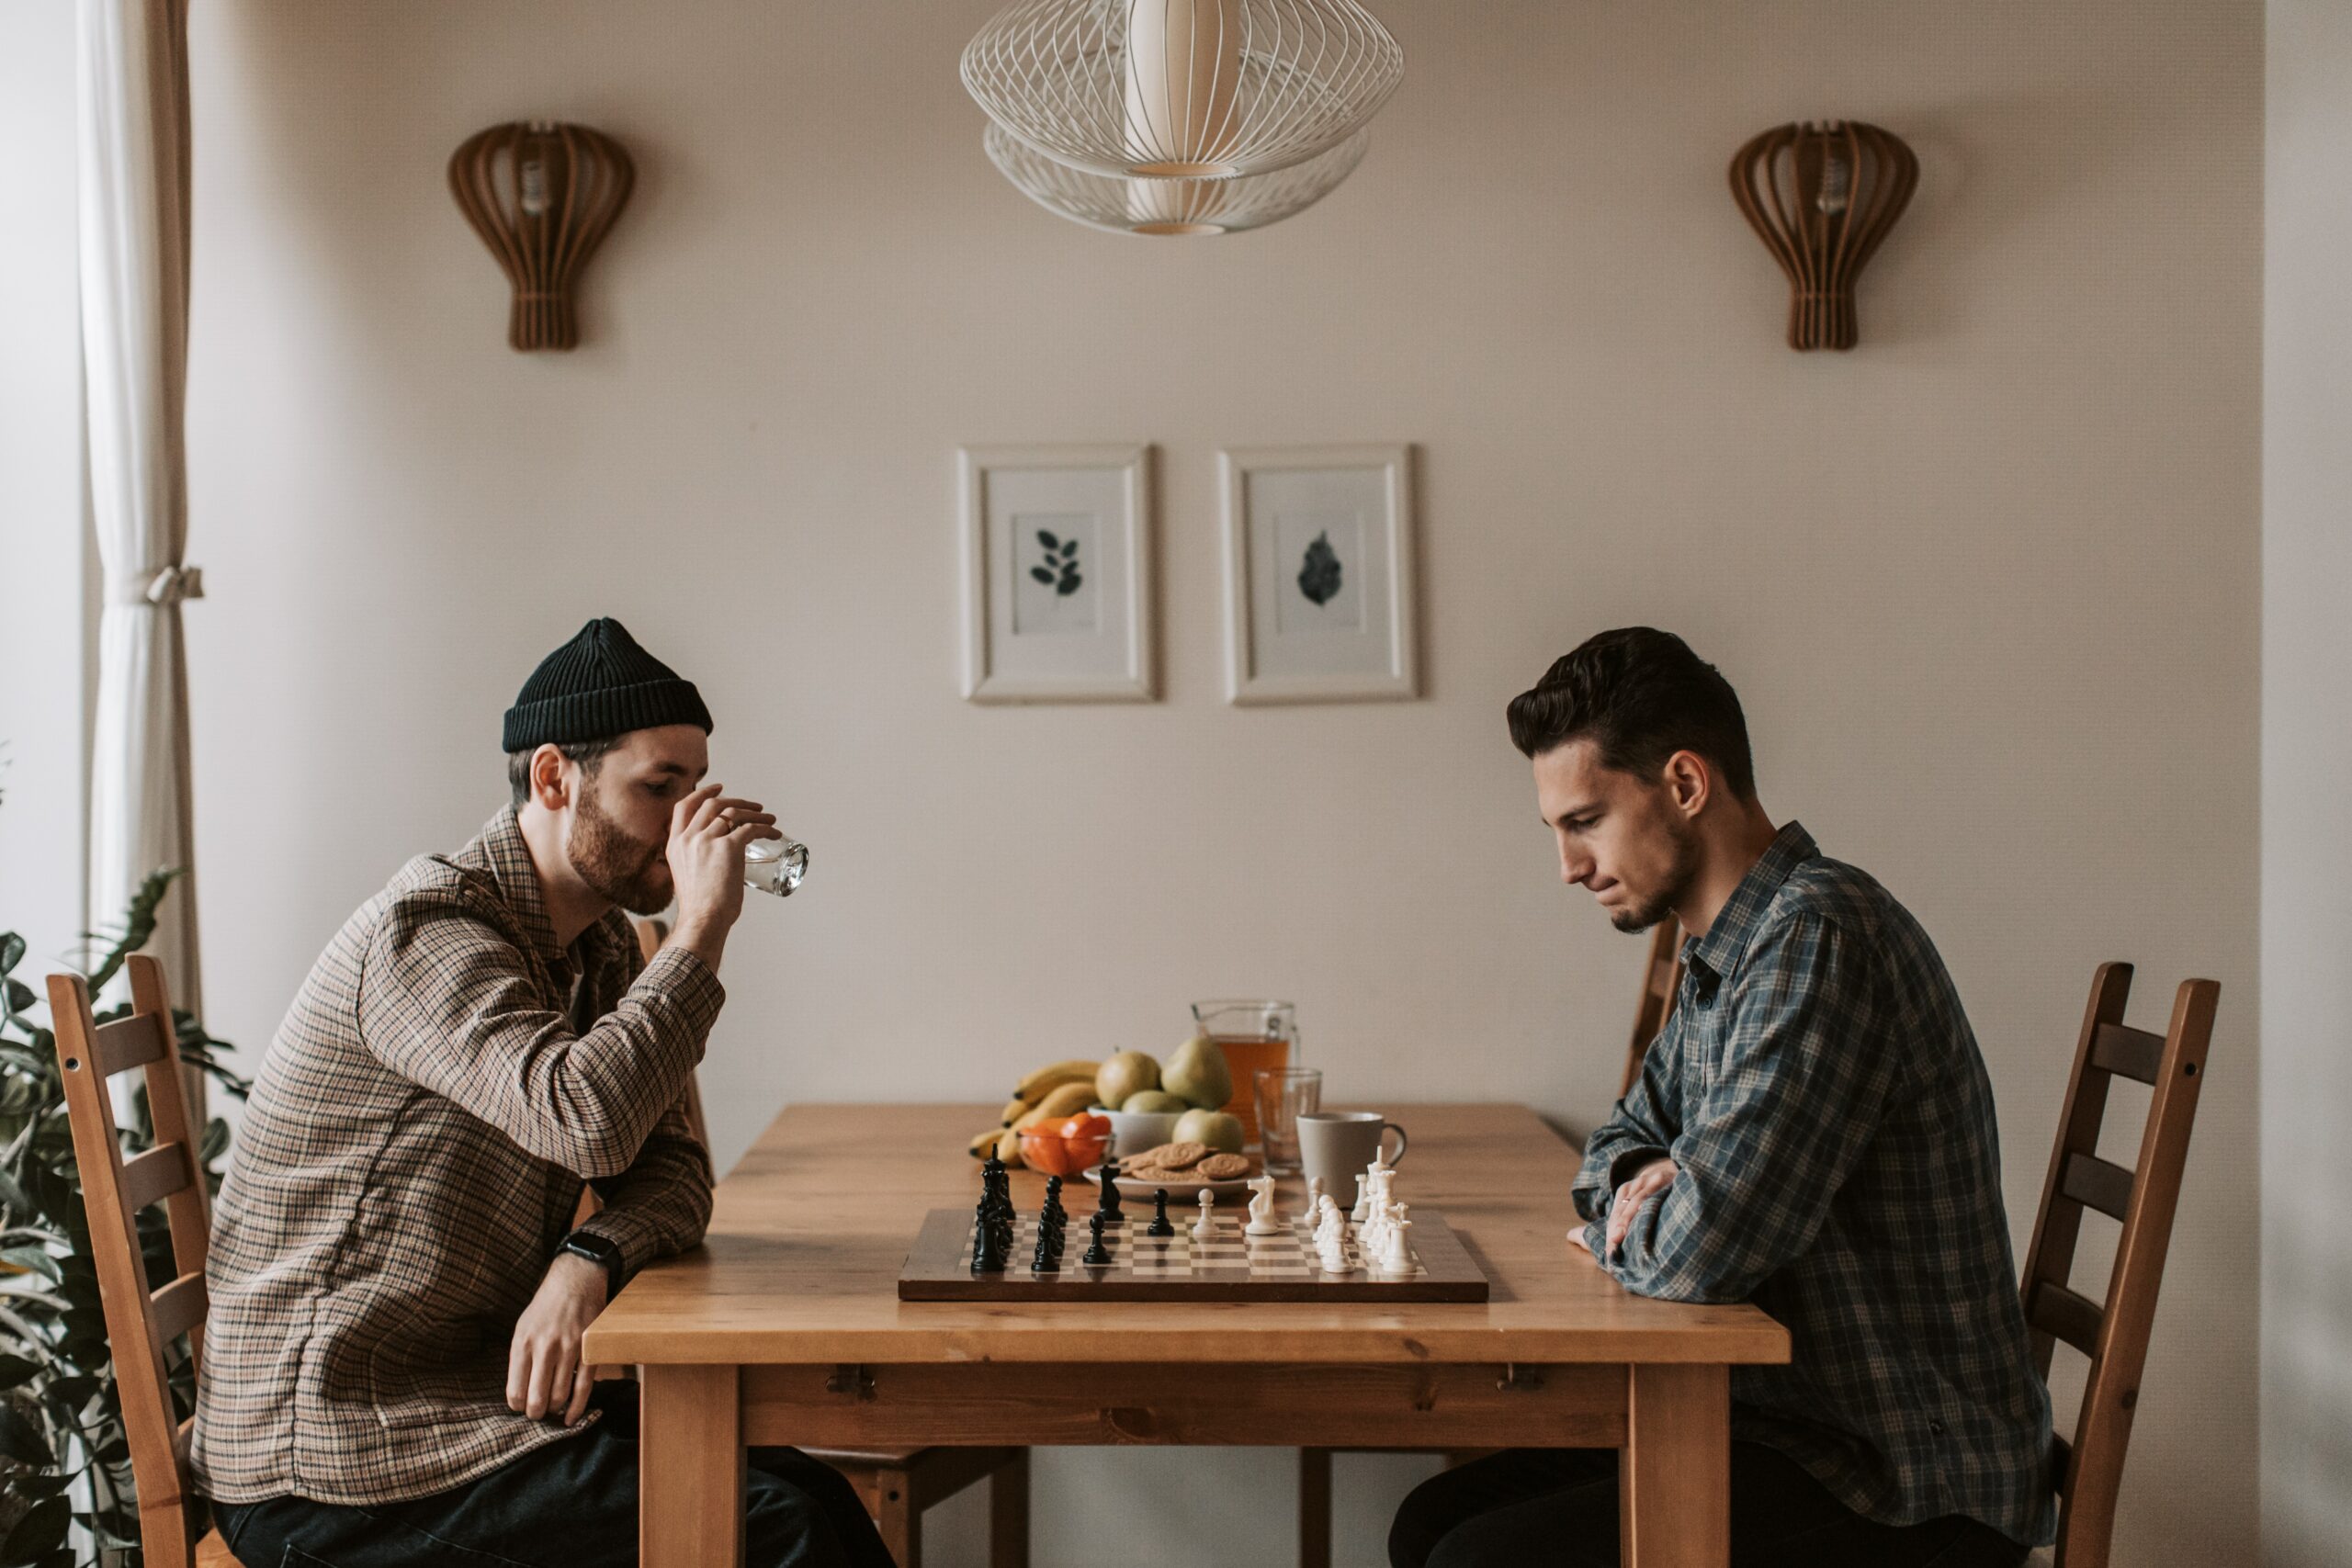 Chess game with intense concentration